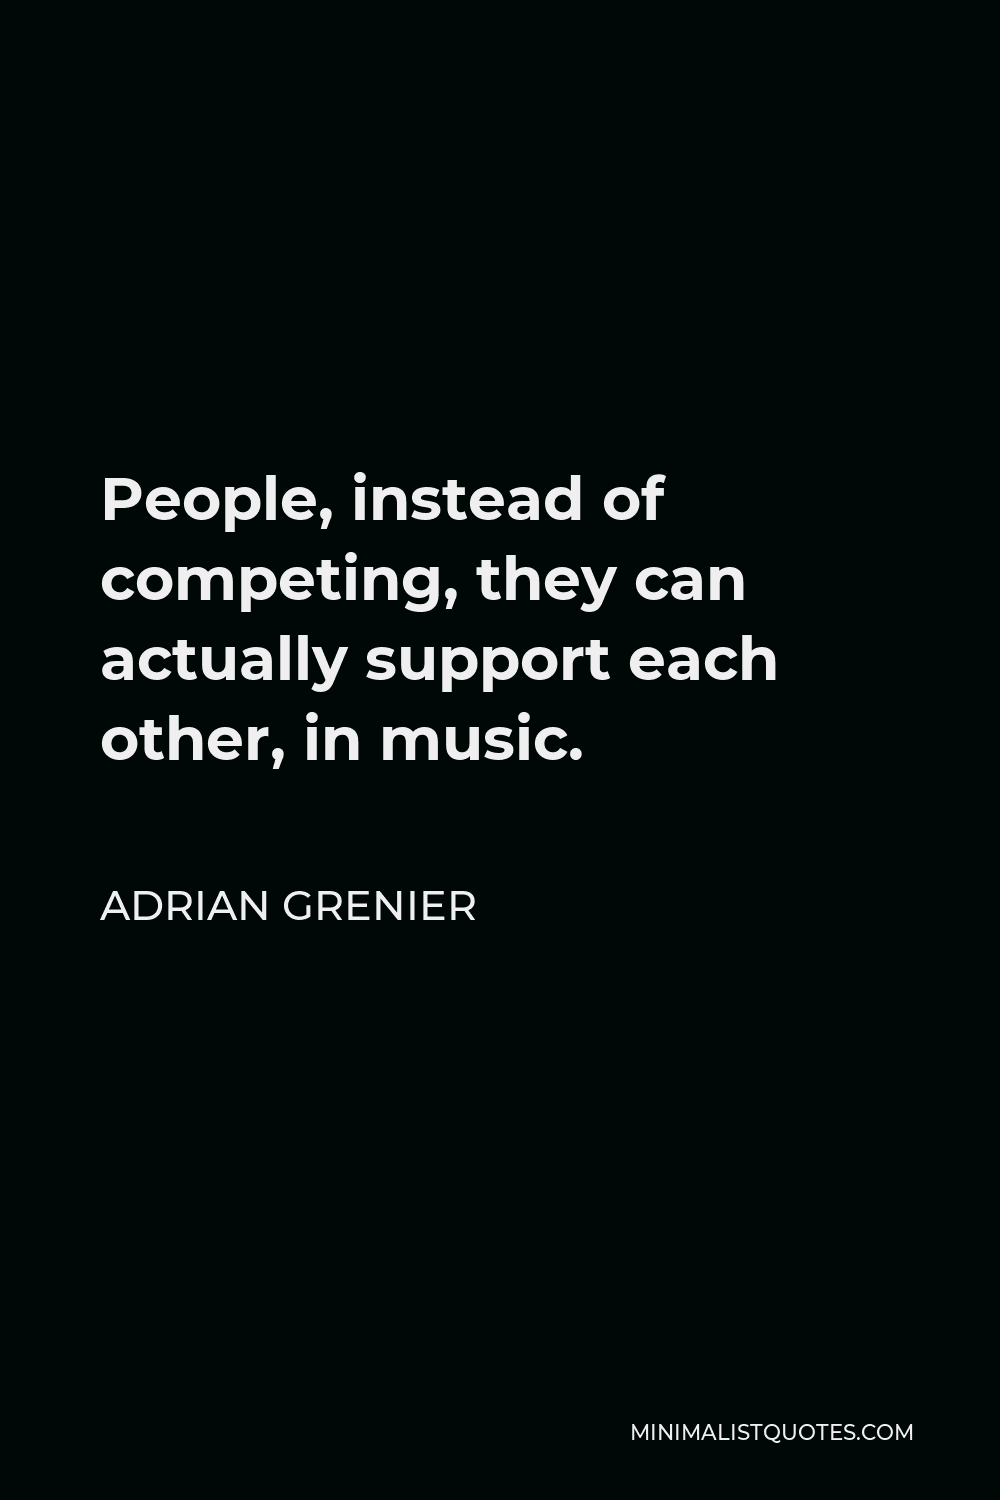 Adrian Grenier Quote - People, instead of competing, they can actually support each other, in music.